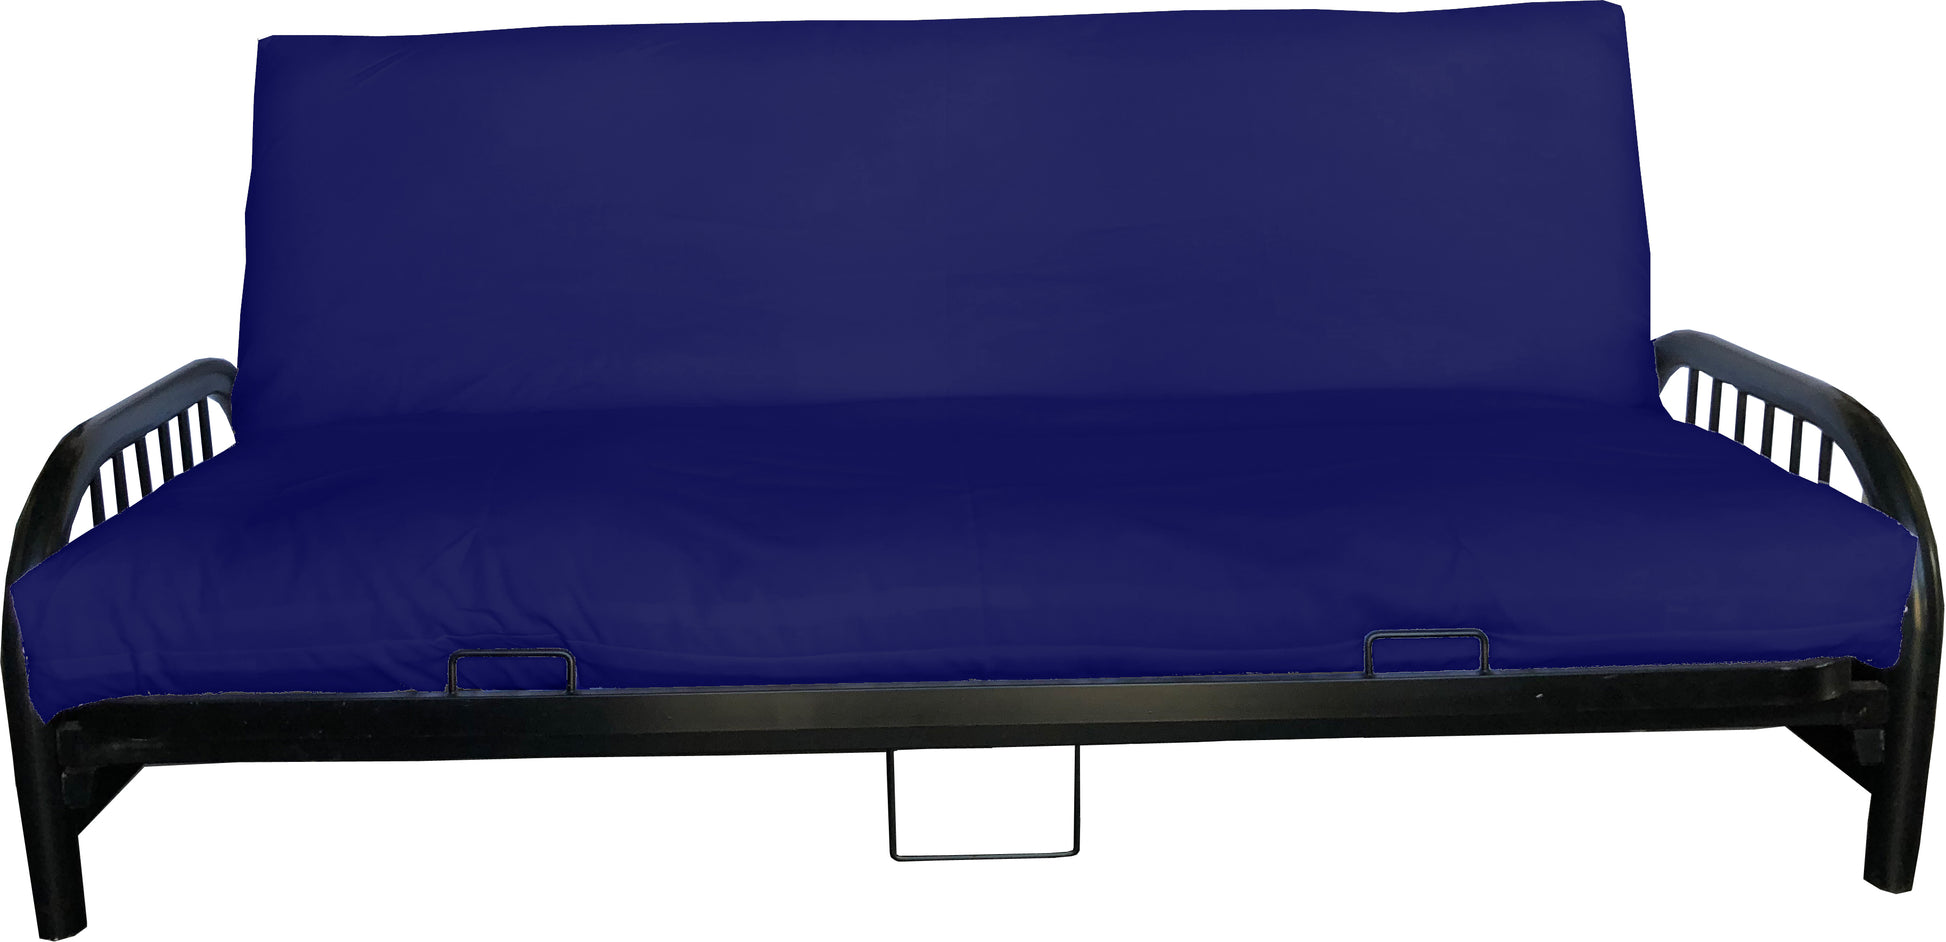 Futon Covers in Navy Blue, Grey, and Black American Living Furniture